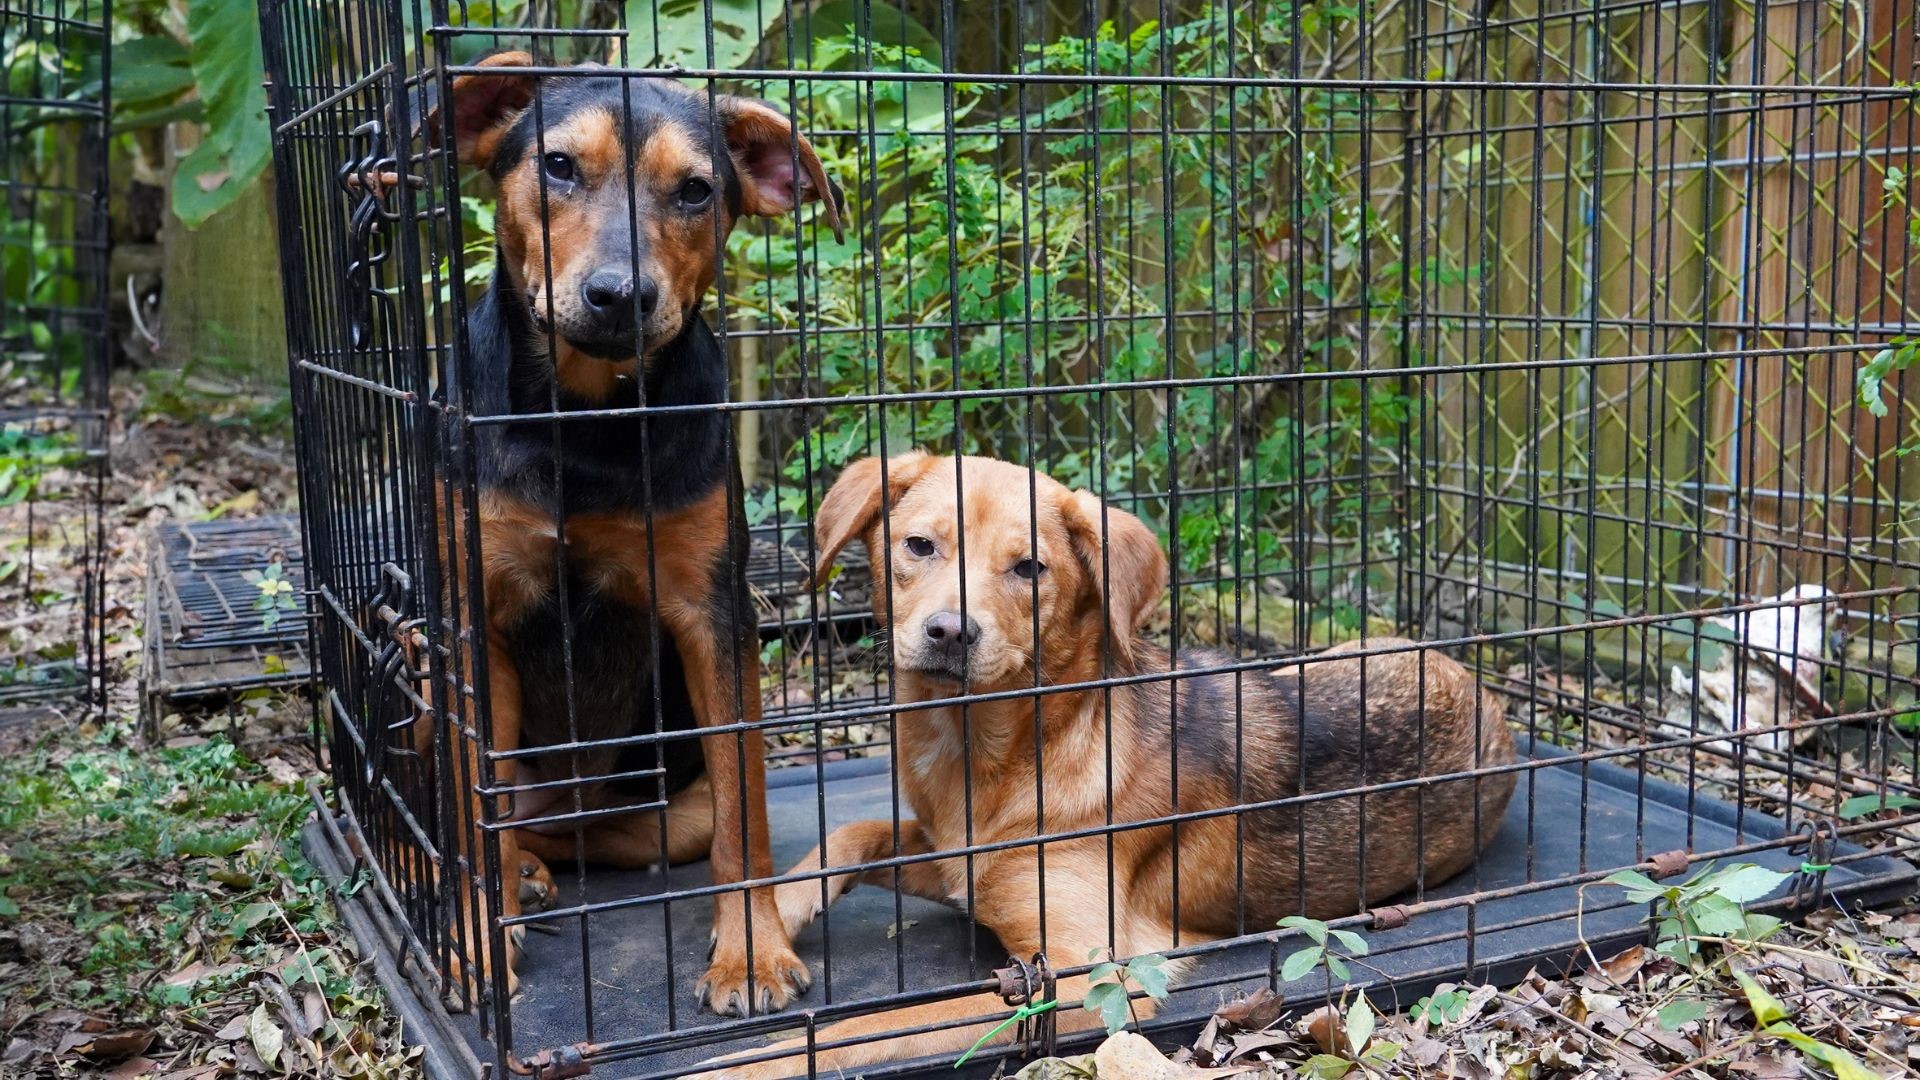 Units from the animal protection organization were called out to assist where nearly 150 cats and dogs were "living outside in pens in their own filth."